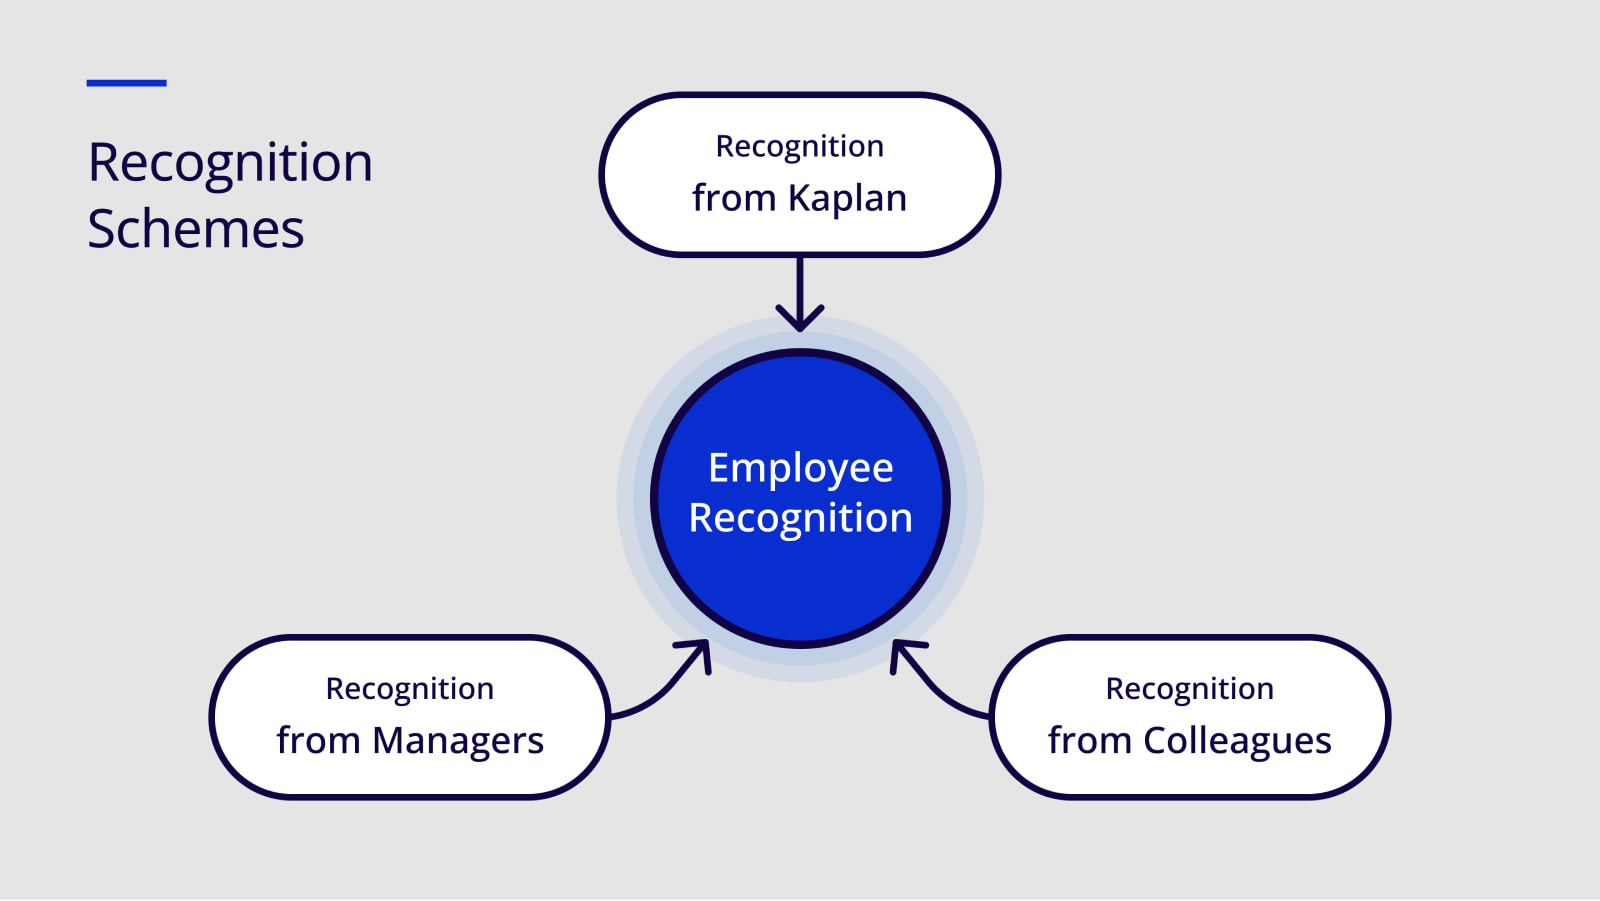 “Diagram showing that employees can be recognised by Colleagues, Managers, and Kaplan. 